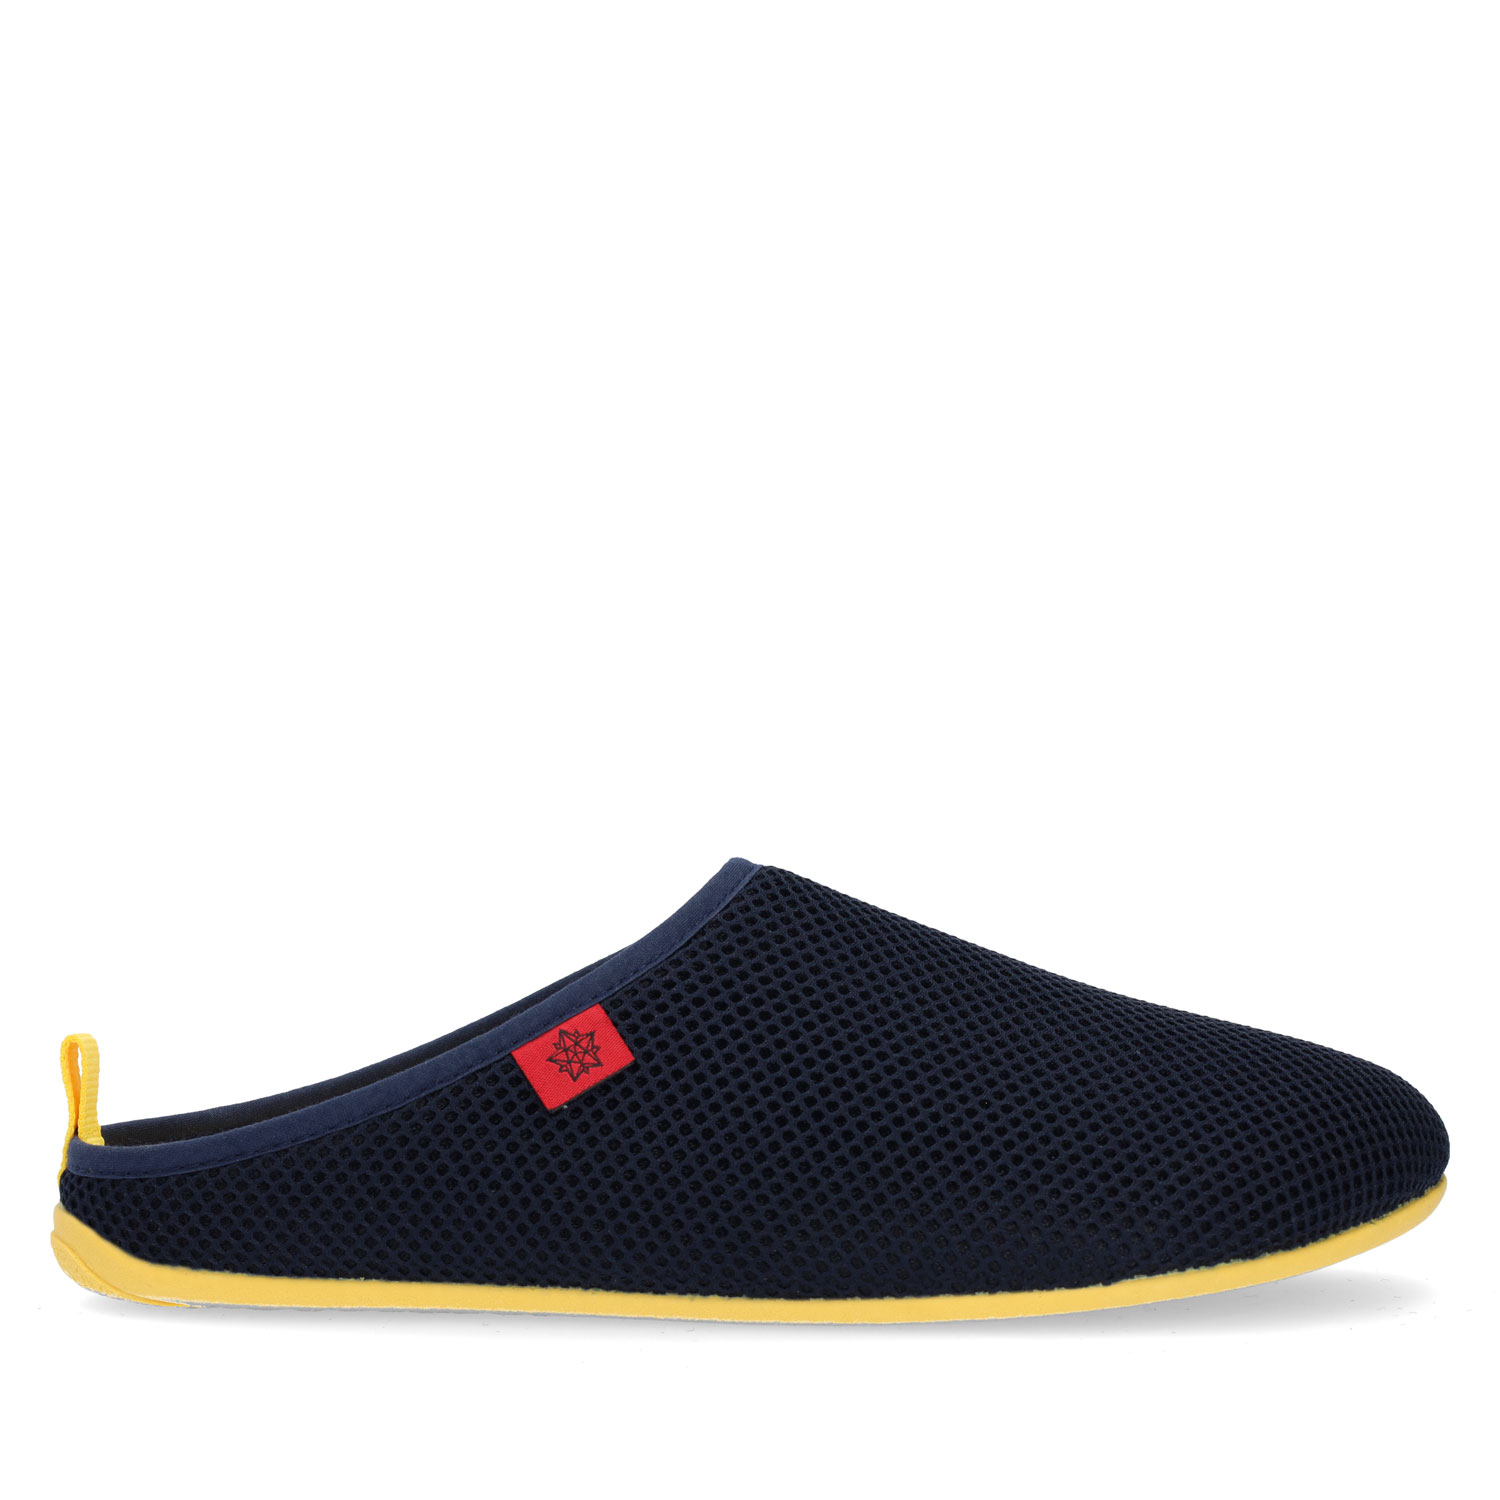 Spring/ Summer Unisex Slippers in Navy mesh with Yellow outsole 